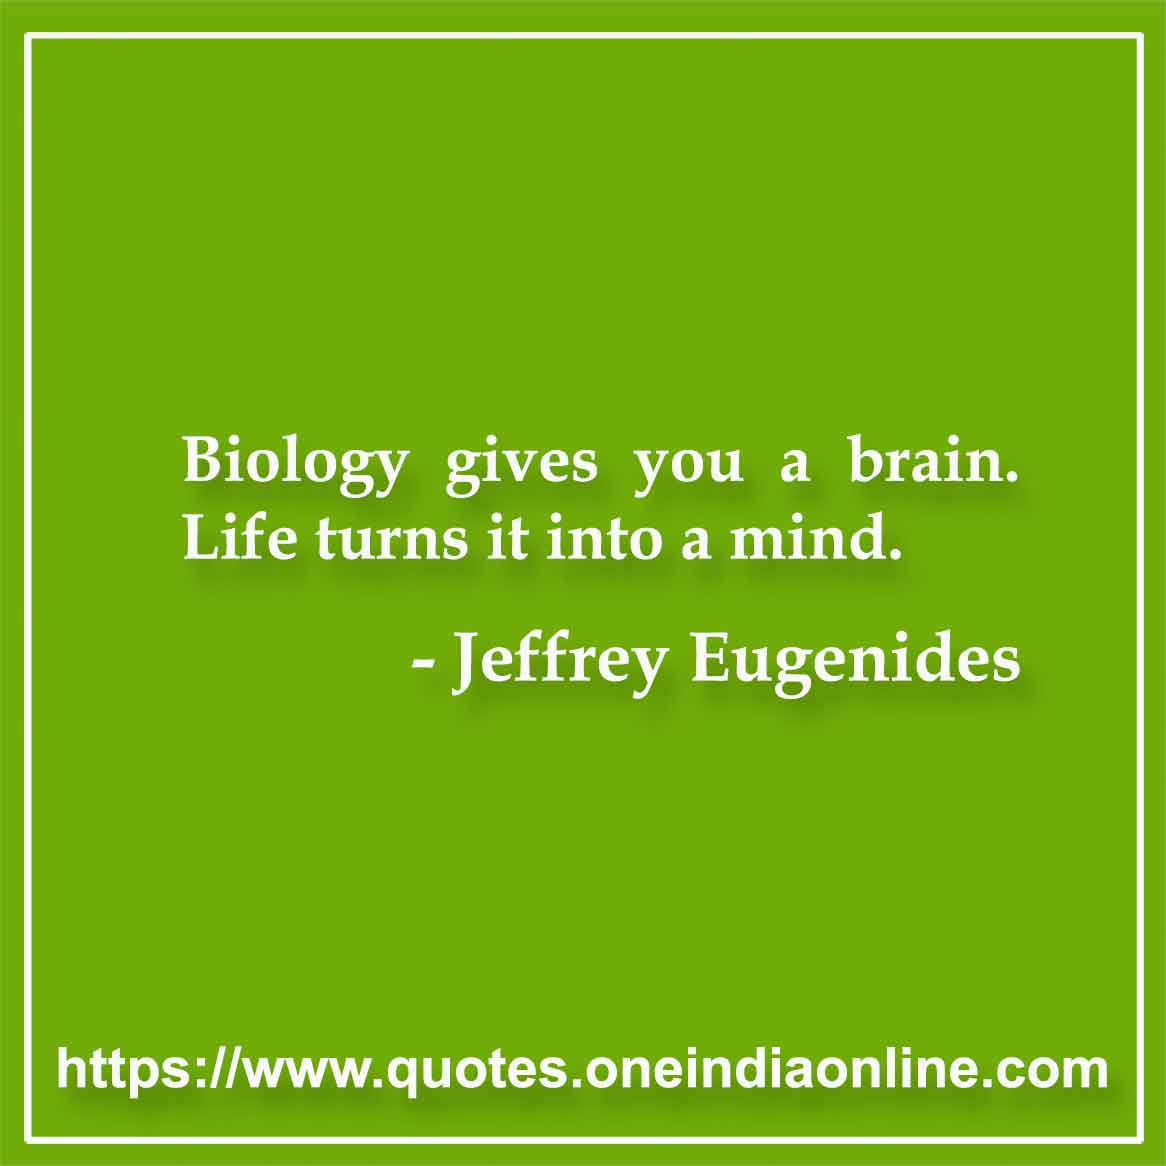 Biology gives you a brain. Life turns it into a mind.

- Jeffrey Eugenides